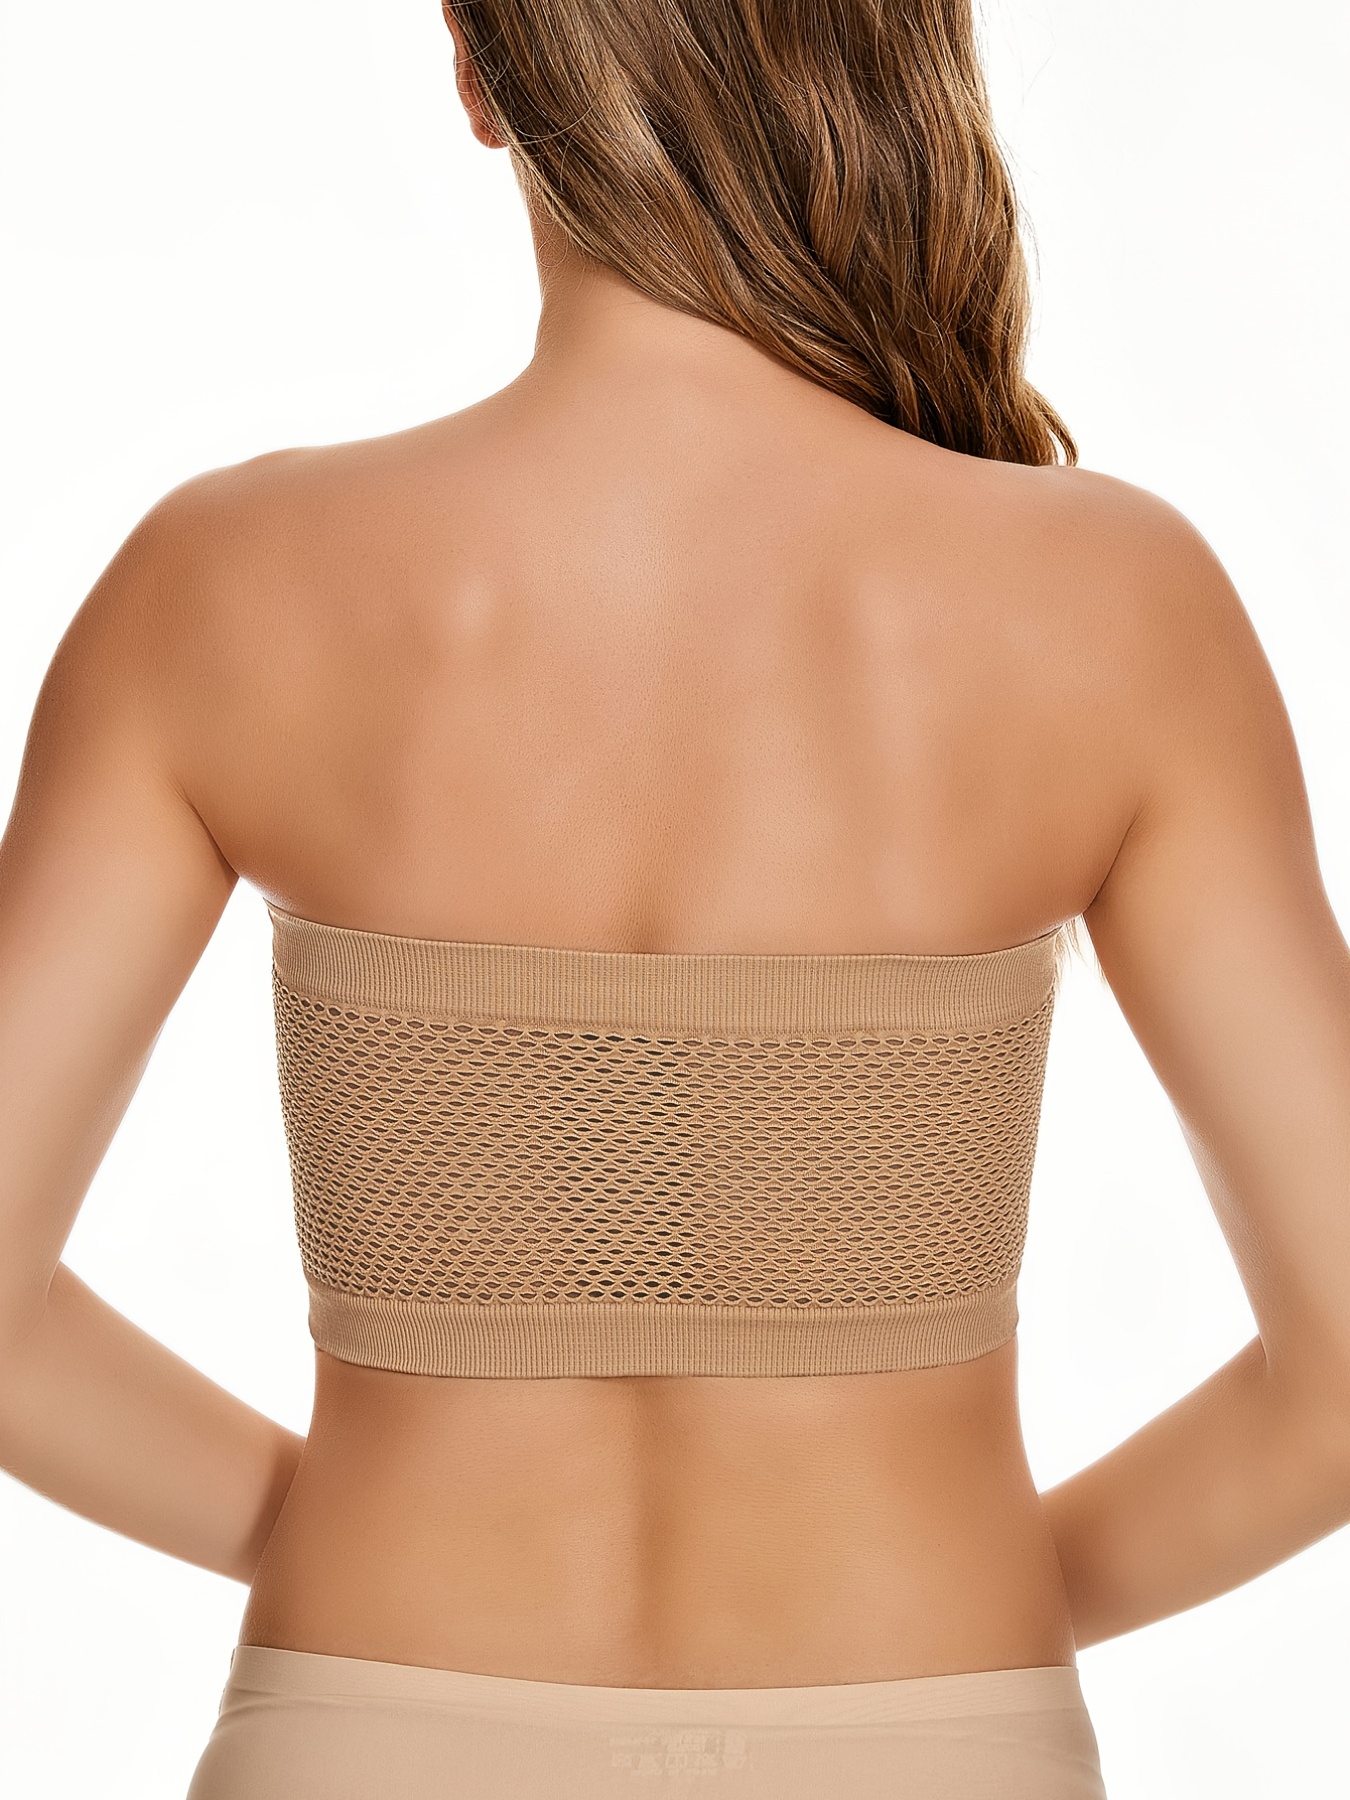 Brisk Rhythm Invisible Bandeau Bra With Support,Strapless Comfort Wireless  Bra Stretch Seamless Bandeau for Women. (Grey+Black+Beige, S) at   Women's Clothing store